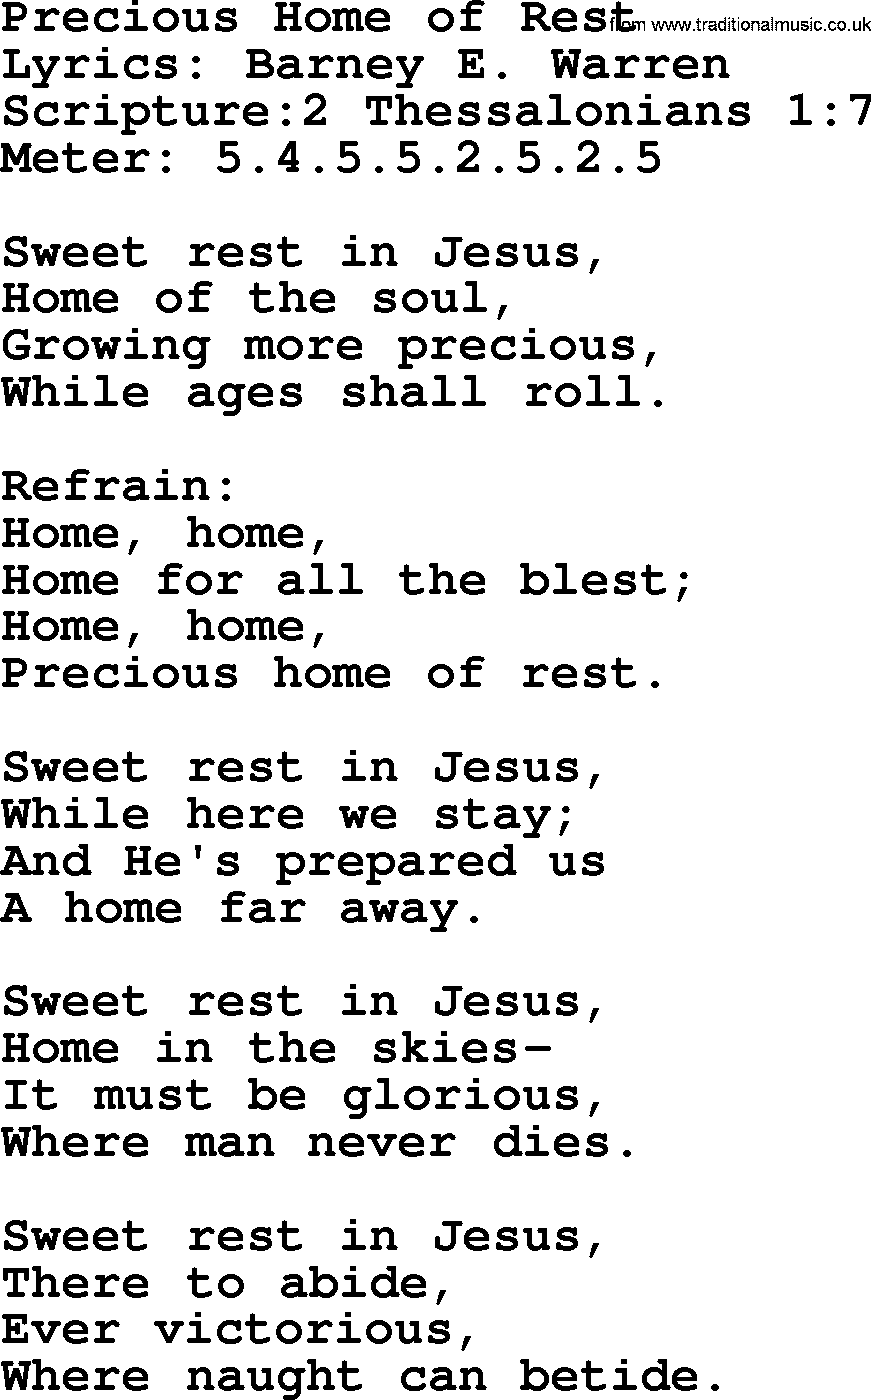 Hymns about  Angels, Hymn: Precious Home of Rest, lyrics, sheet music, midi & Mp3 music with PDF